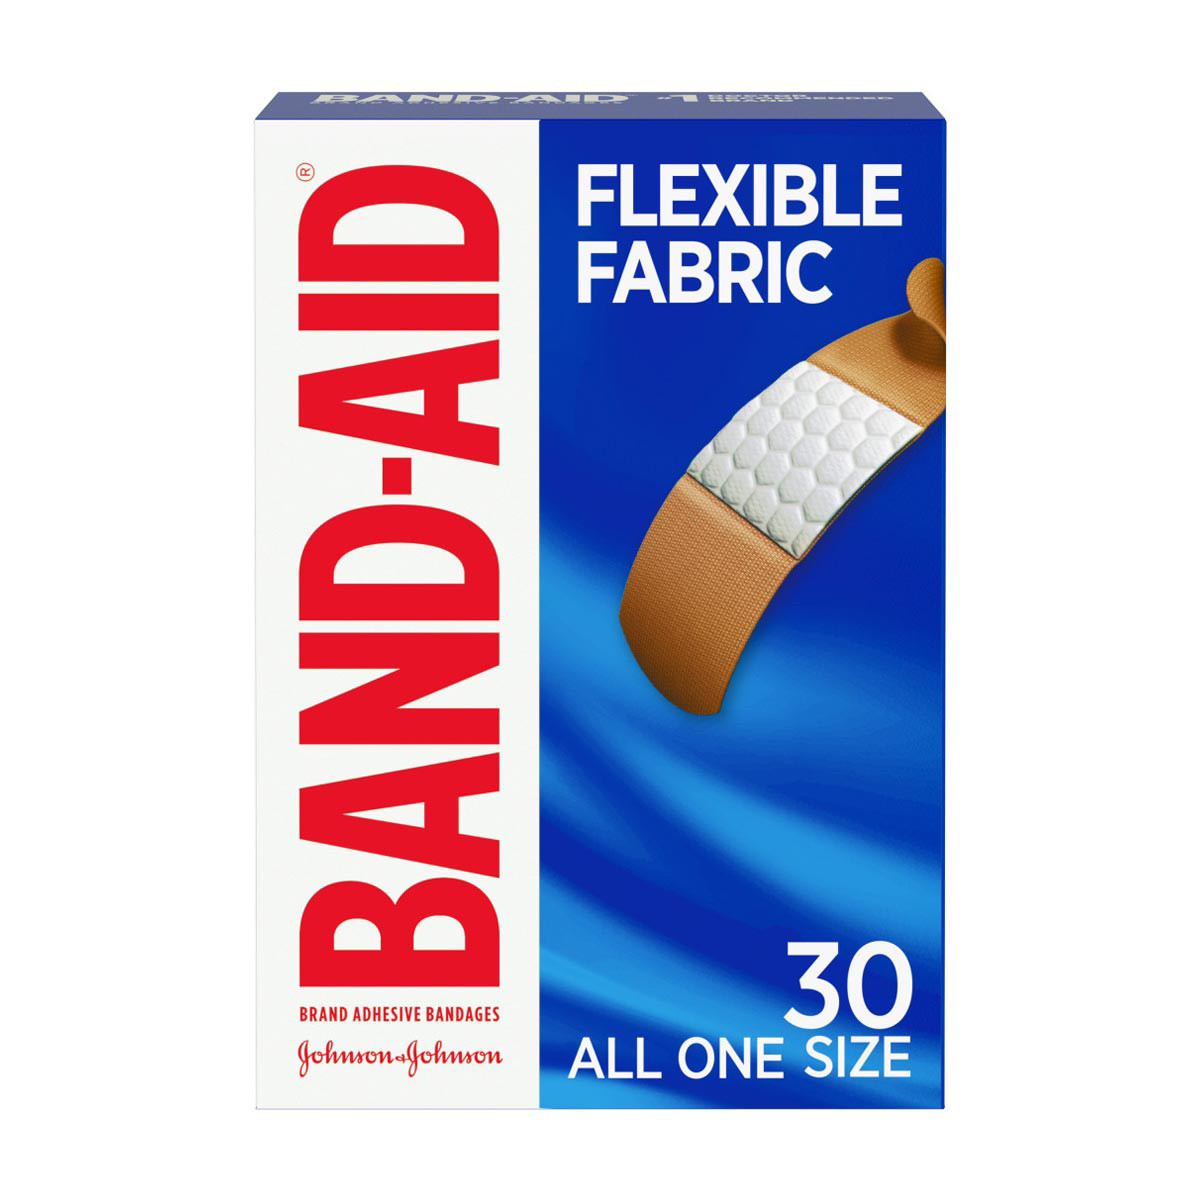 First Aid Supplies, Bandages, Rubbing Alcohol